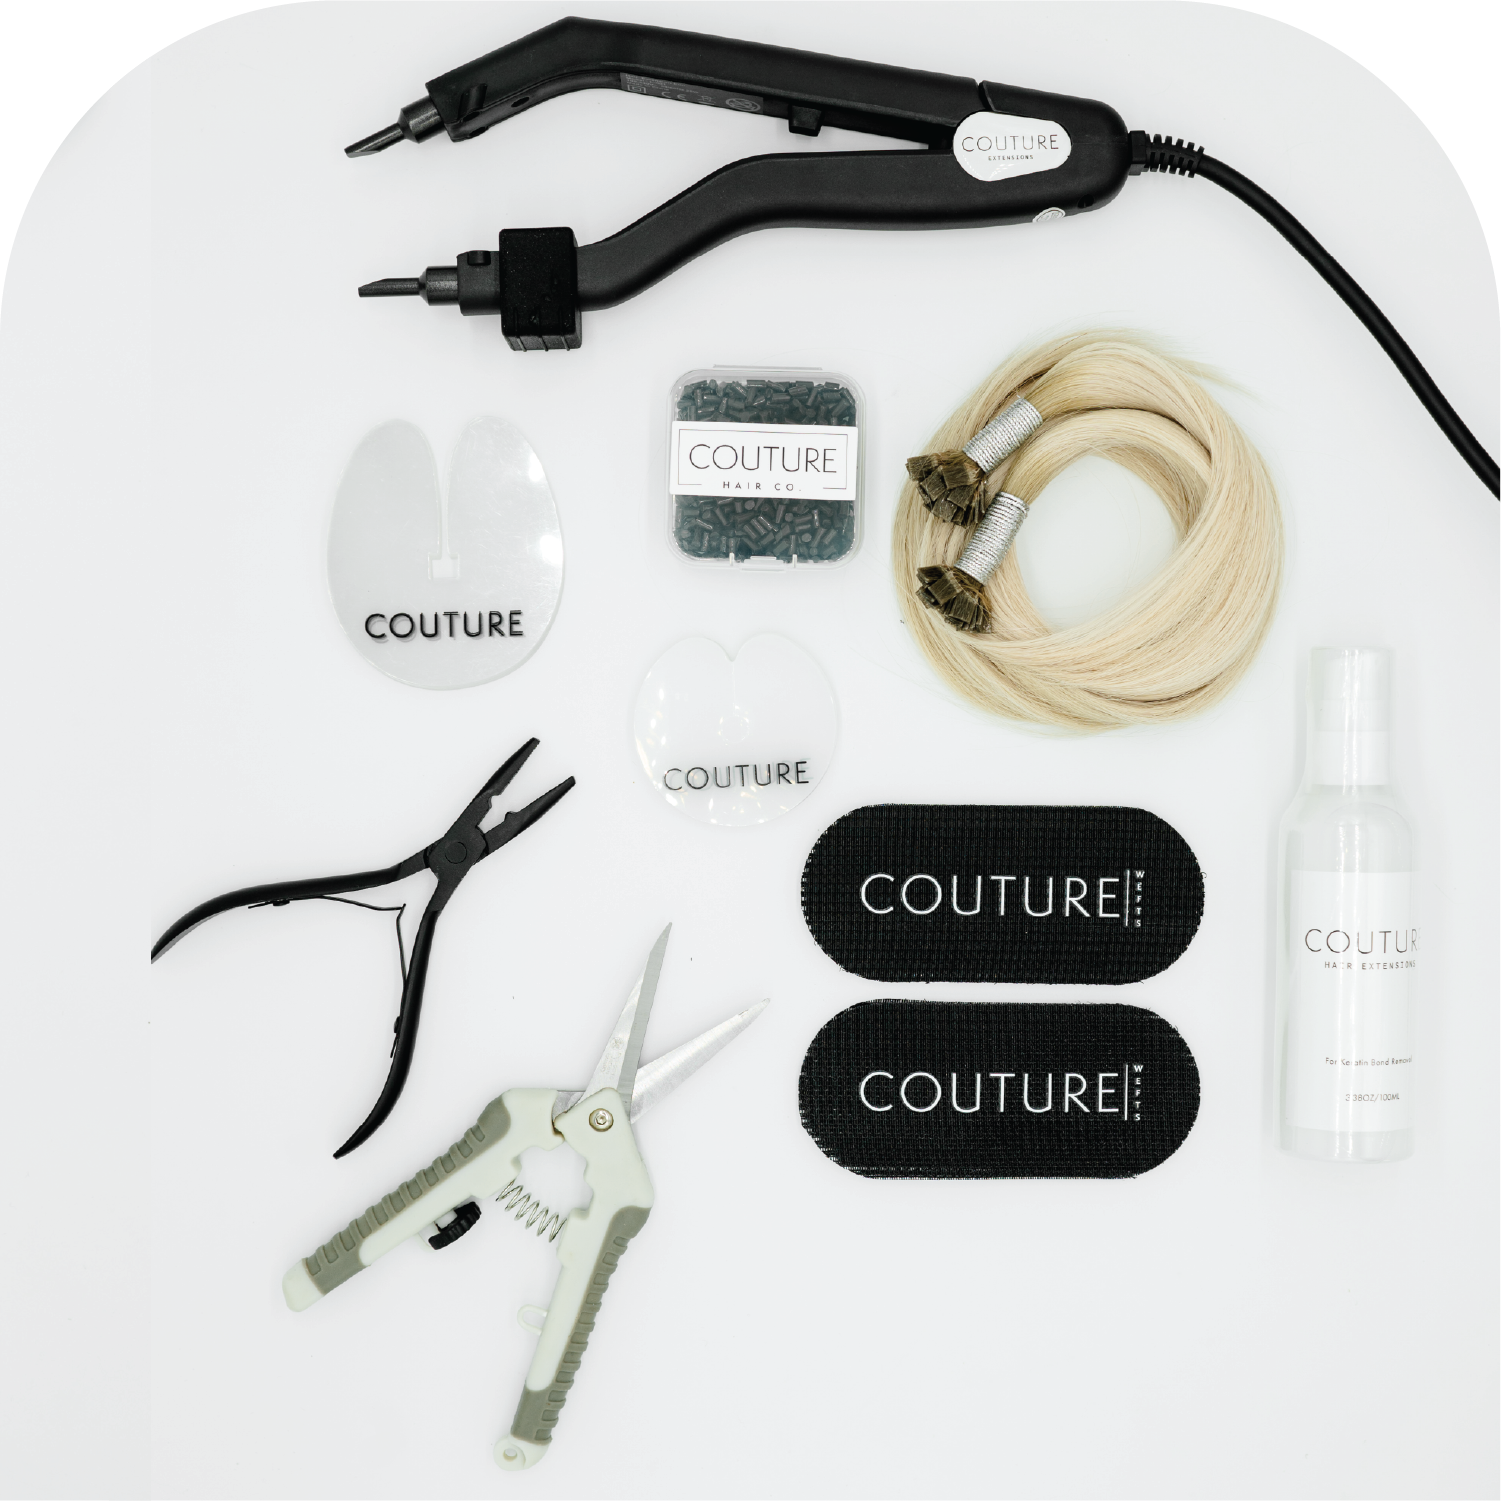 Couture Hair Co. Couture Tip Stylist Starter kit with Heat Tool, Head Shields, Scissors, Pliers, Bond Remover, Keratin Replacement Beads, Velcro Grippers, Practice Hair.